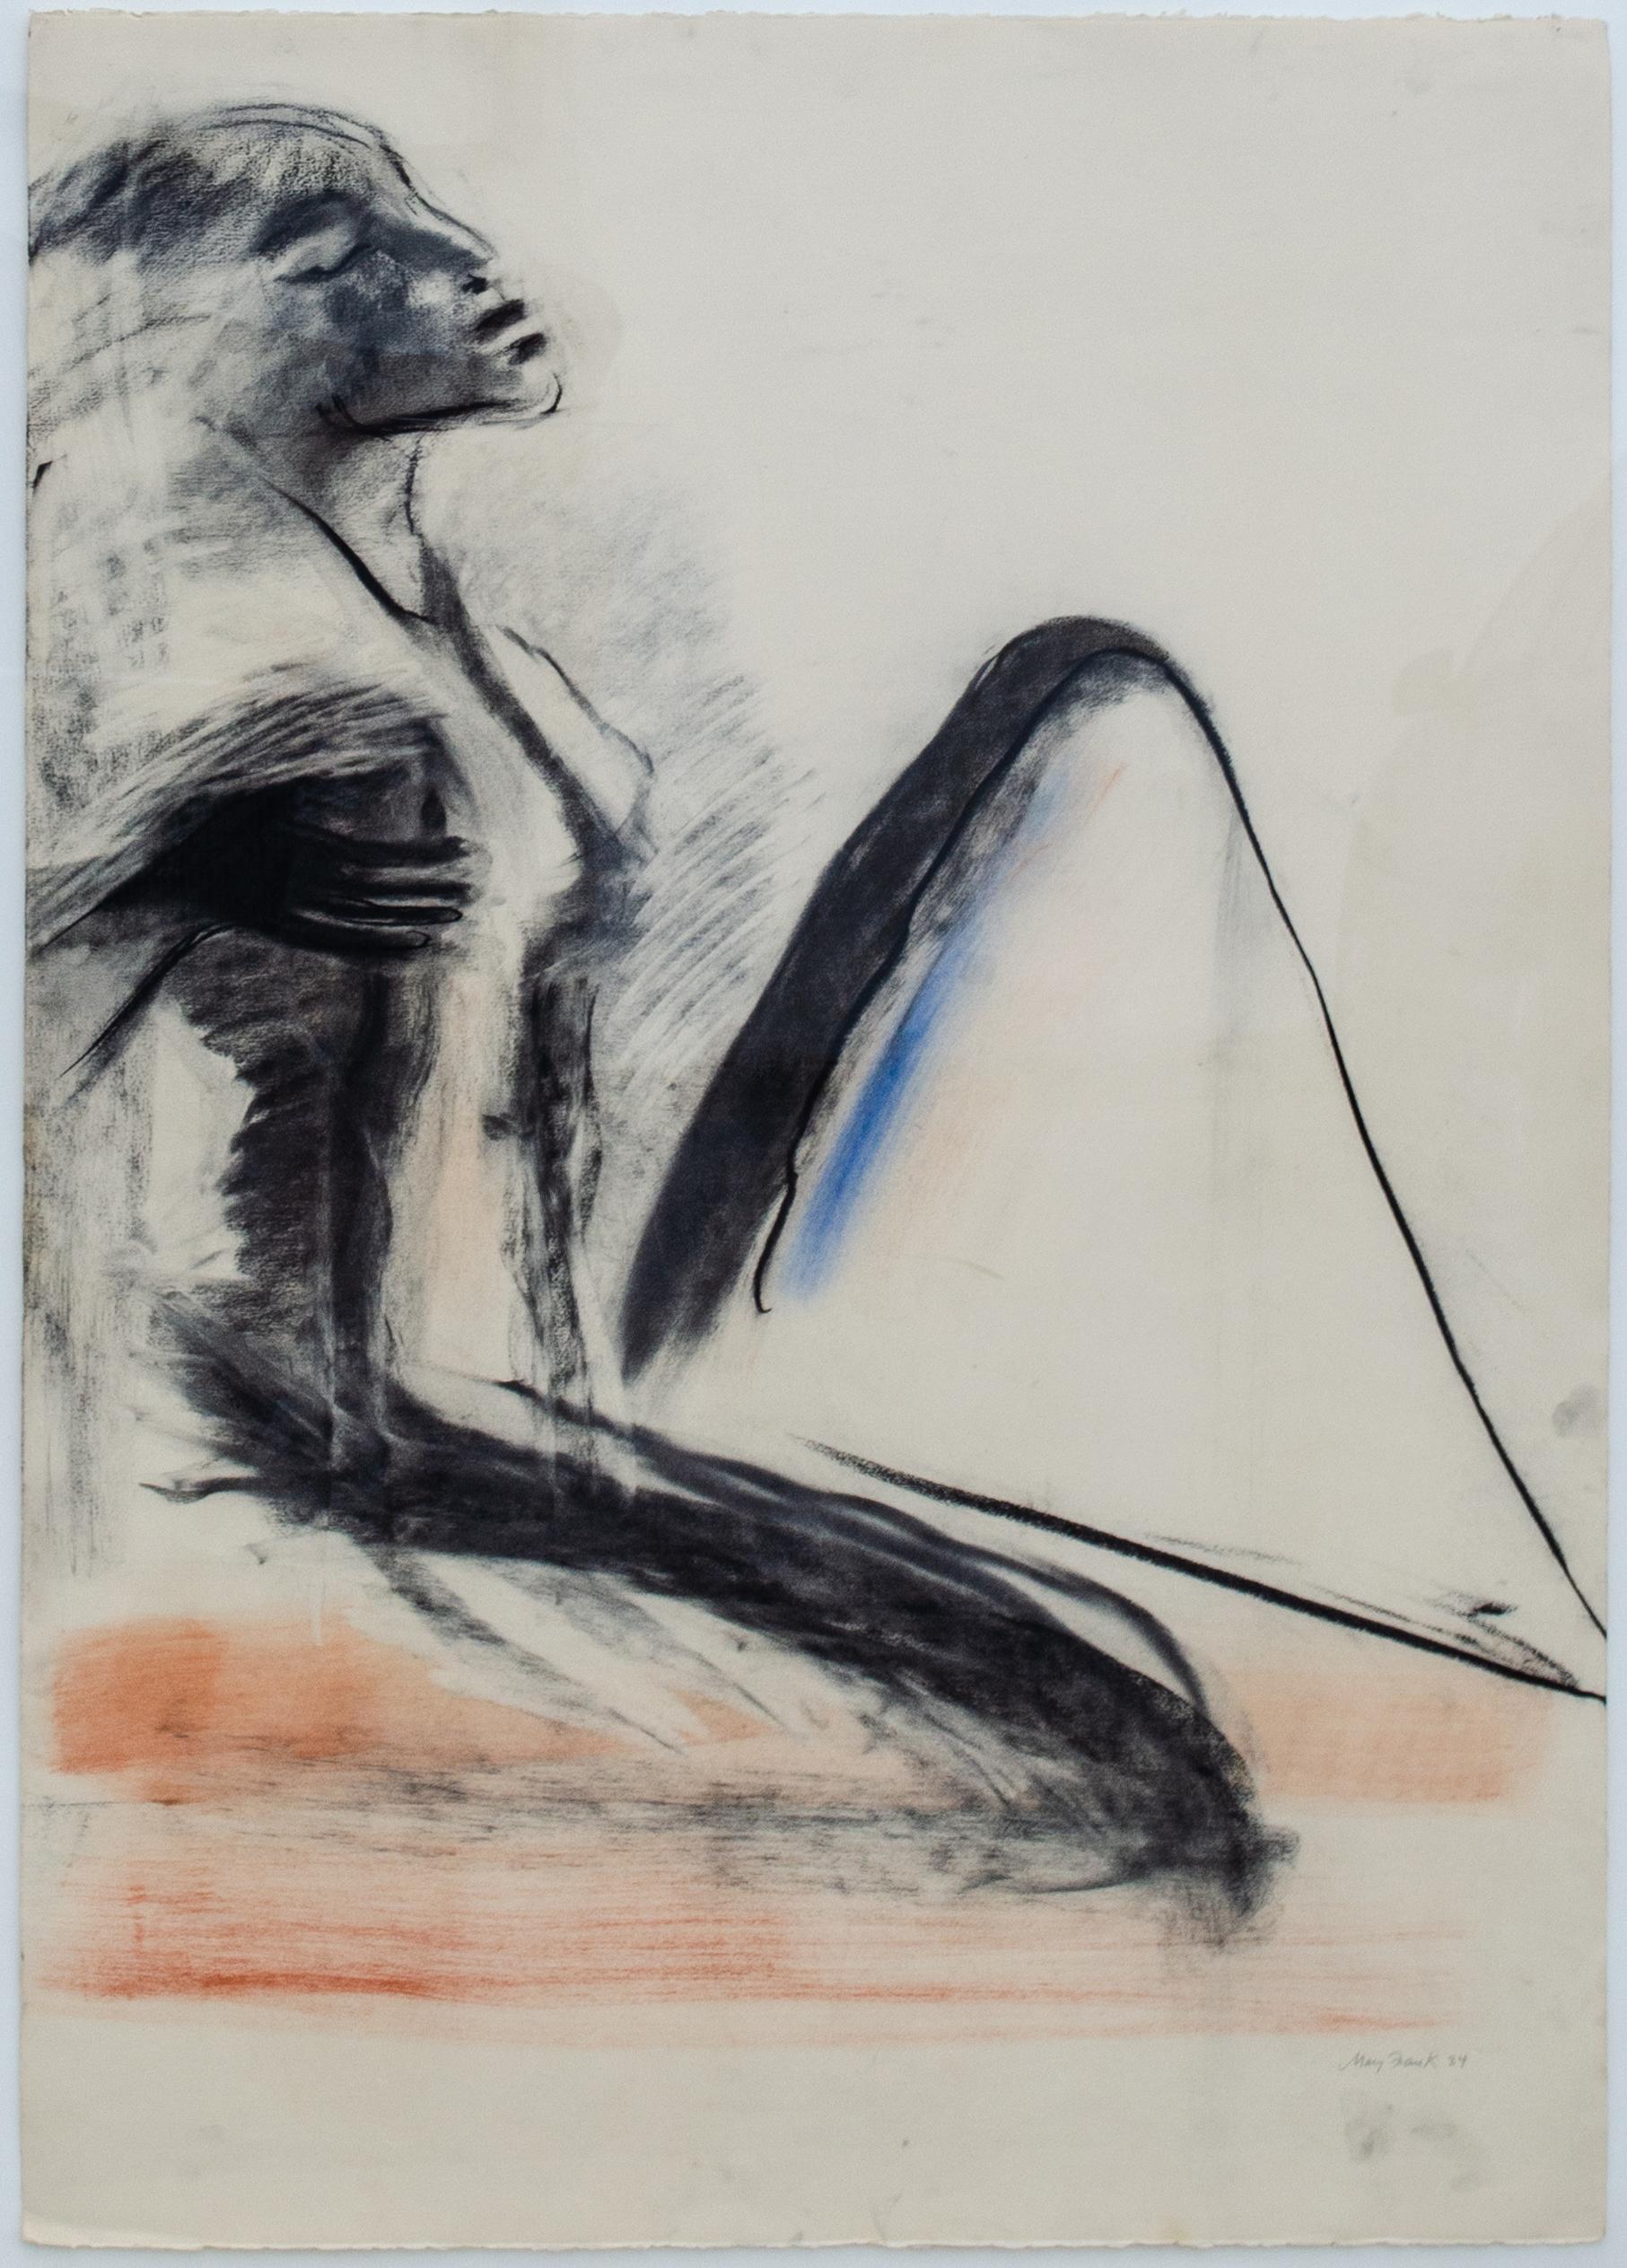 Mary Frank (British/American, b. 1933)
Chant, 1984
Charcoal and pastel on paper
41 3/4 x 29 3/4 in. 
Framed: 46 1/2 x 34 1/4x 2 in.
Signed and dated lower right: Mary Frank 84
Midtown Payson Galleries Label Verso

Mary Frank is known for creating